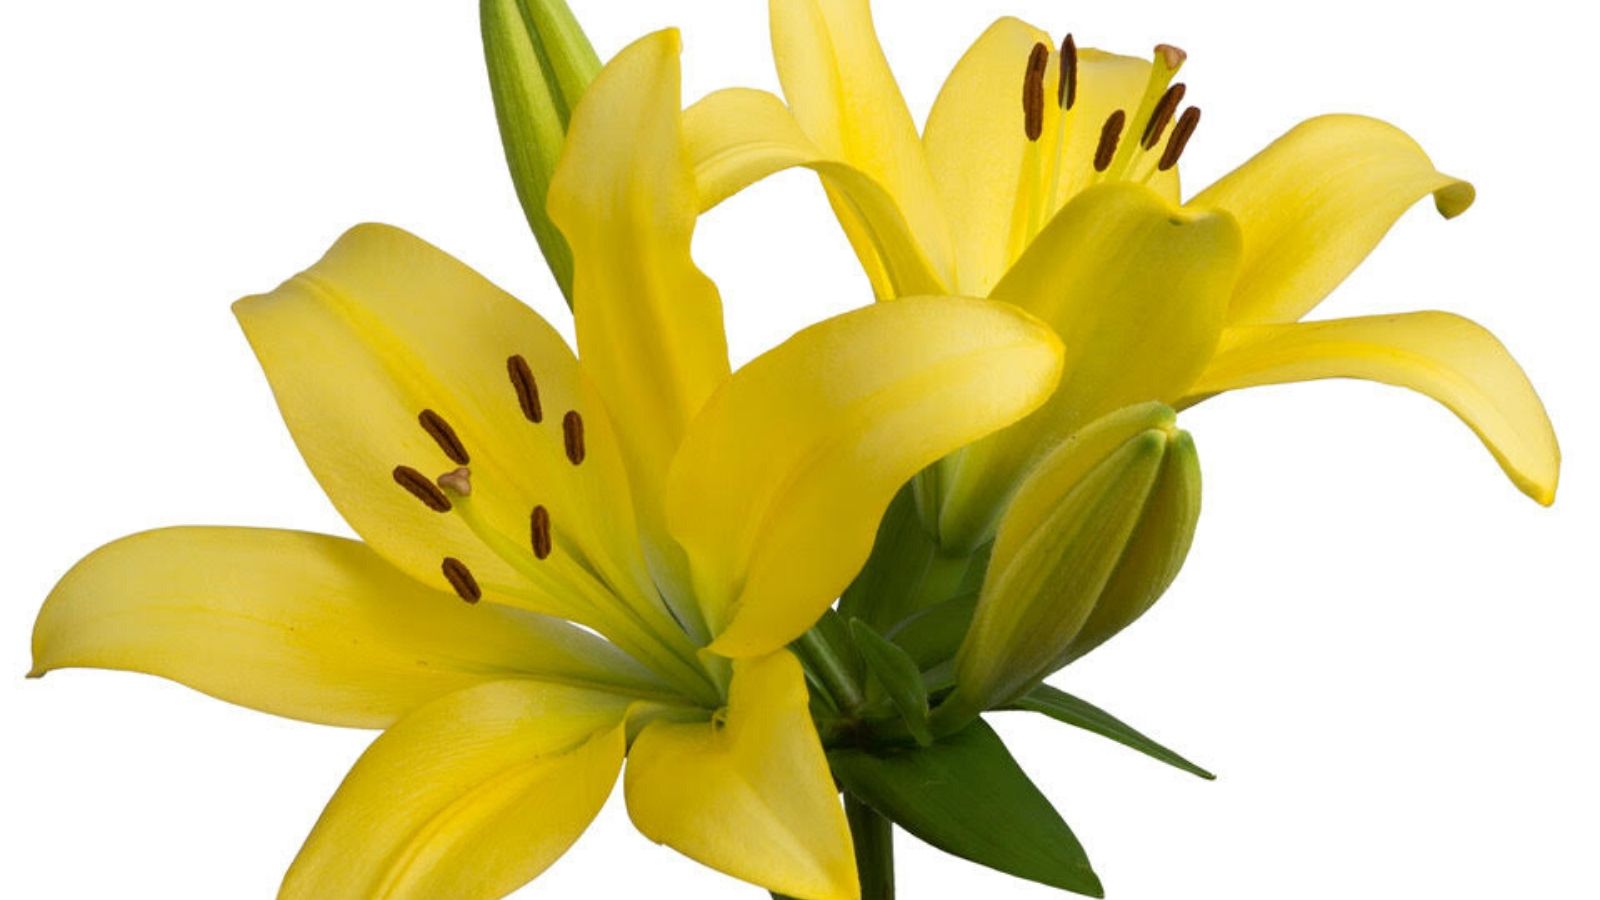 How Do Our Brains Respond to Yellow Flowers? - Article onThursd